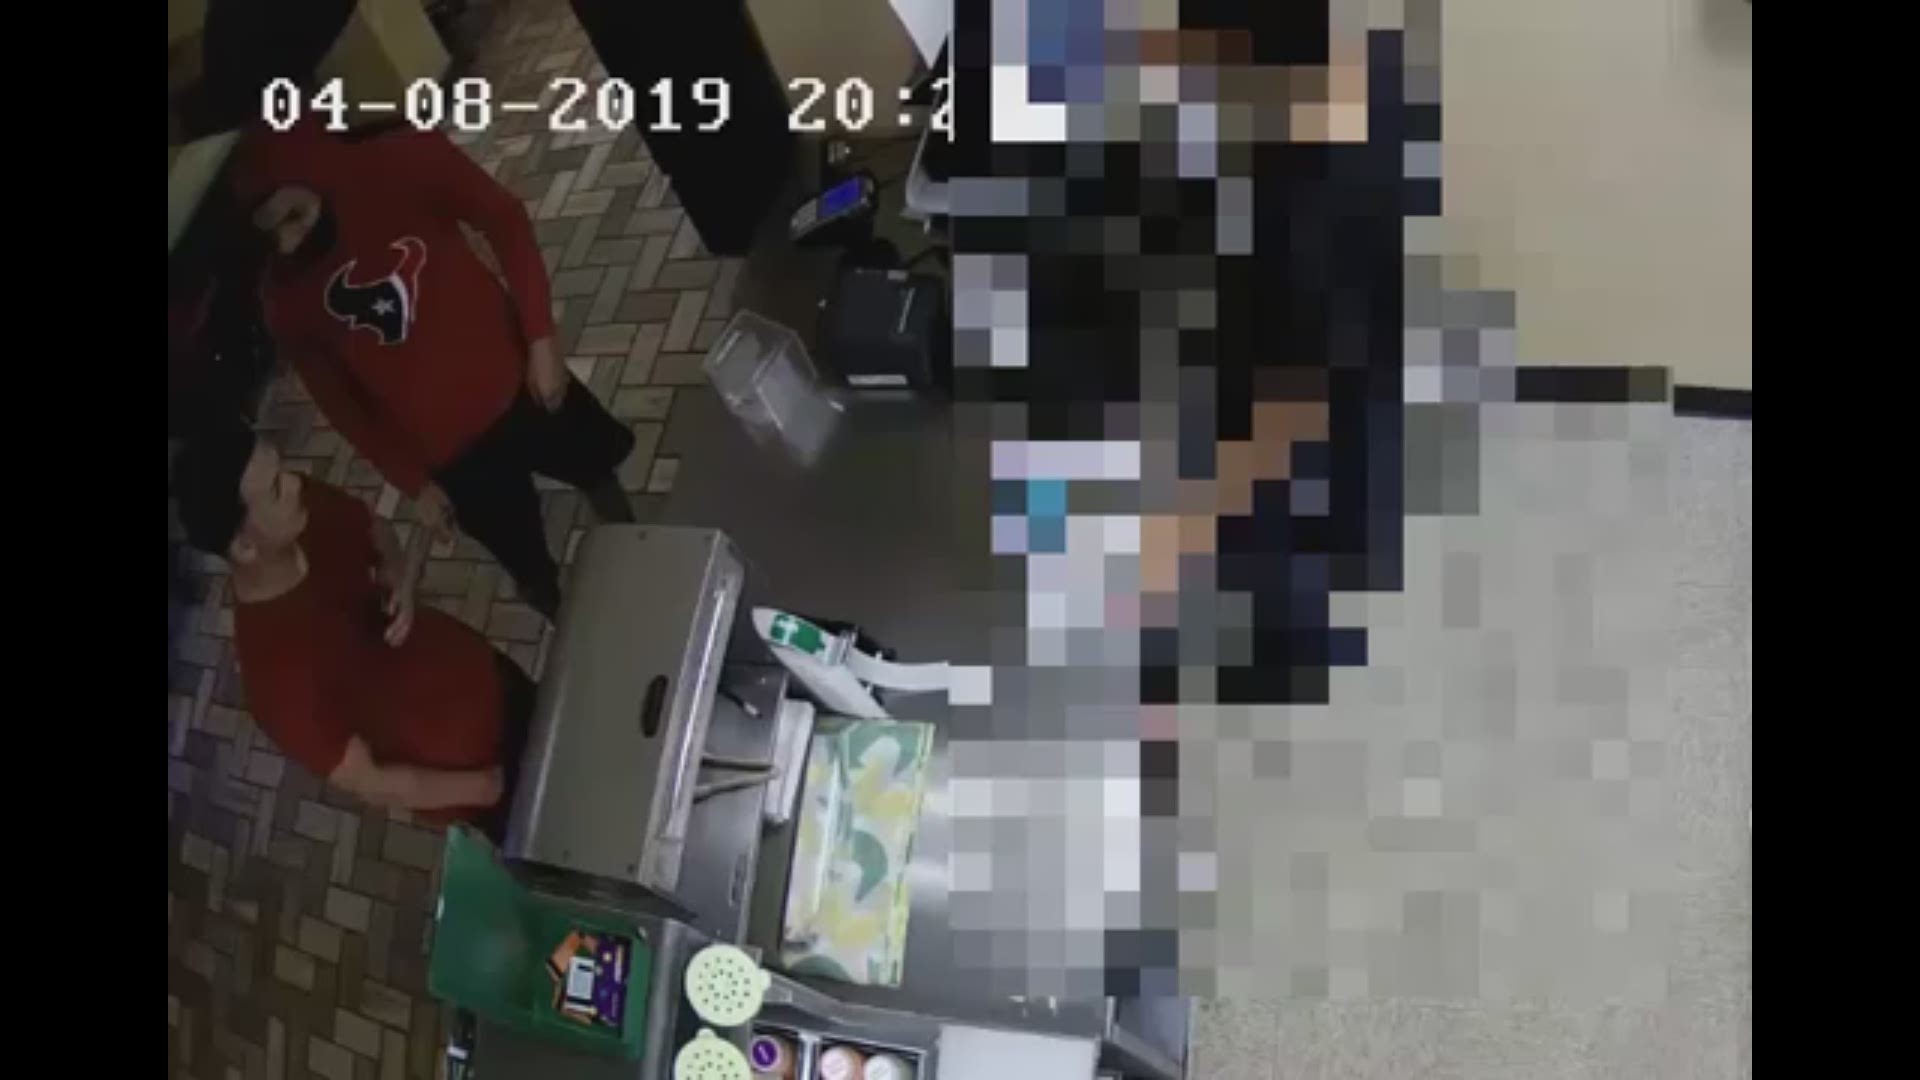 Police are asking for the public’s help in identifying two aggravated robbery suspects who threatened a Subway employee with a gun in southeast Houston in April.